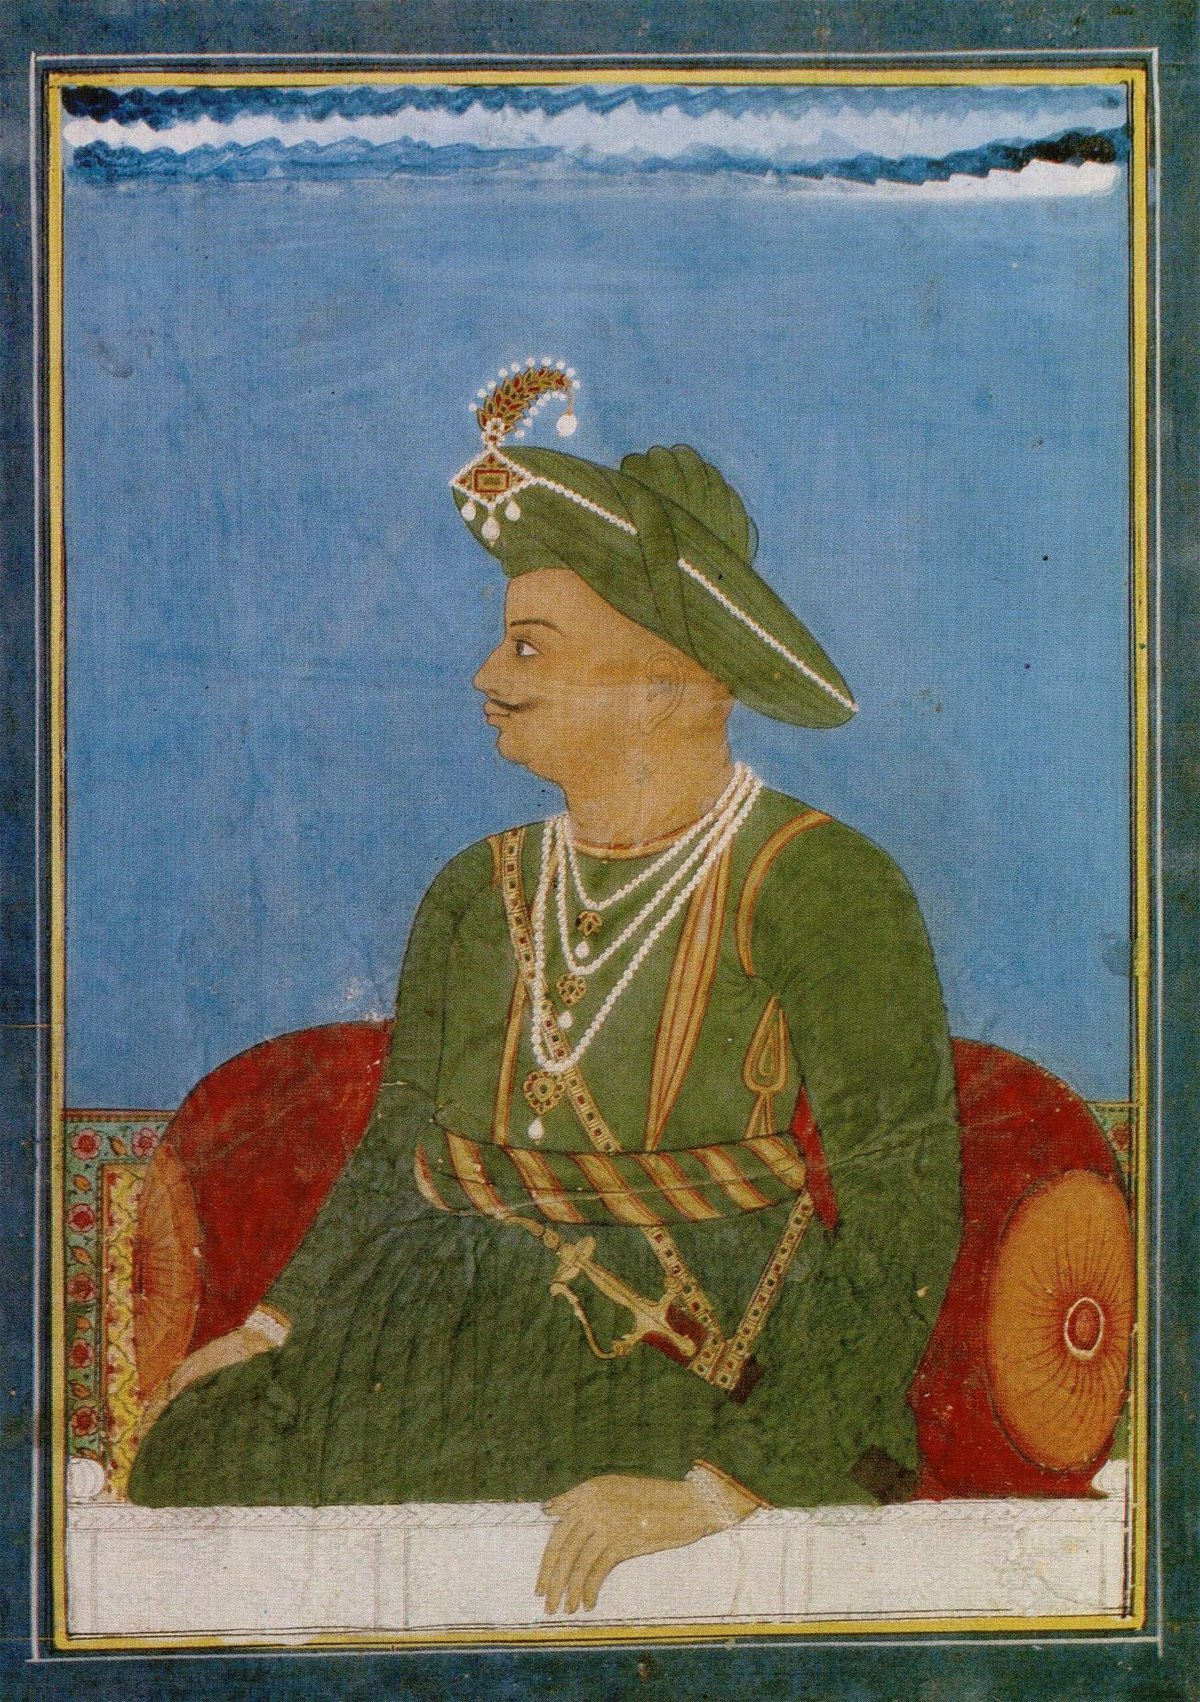 <i>Bonhams</i><br/>Tipu Sultan was killed by British forces on May 4